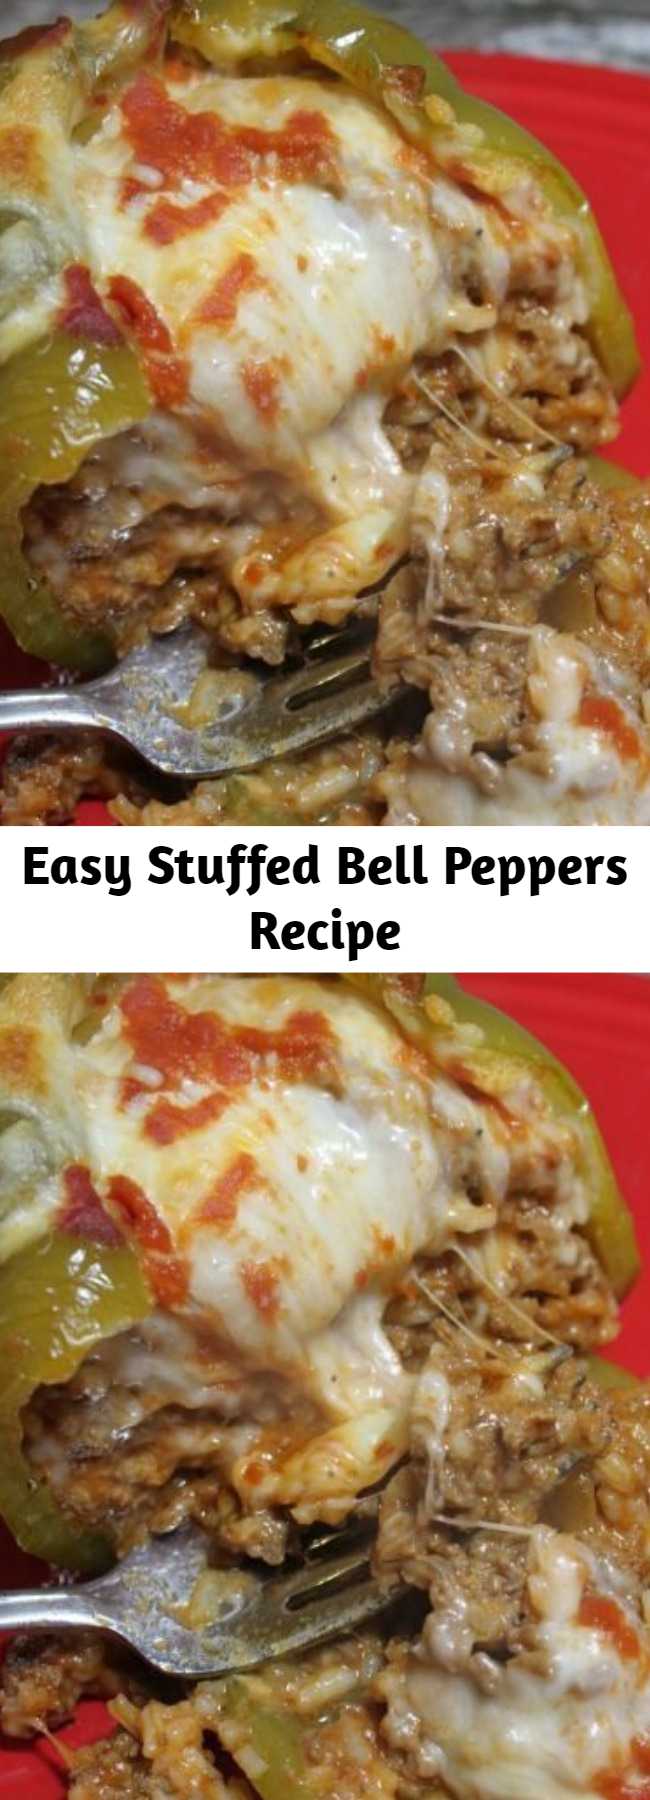 Easy Stuffed Bell Peppers Recipe - These Stuffed Green Peppers are seriously the easiest dish to make (but everyone will think you spent hours in the kitchen)! This simple dish combines ground beef, white rice, and peppers to make a mouthwatering meal. Making stuffed peppers is easy and is a quick weeknight dinner idea. Swap out ground beef with ground turkey and make it a healthier option!